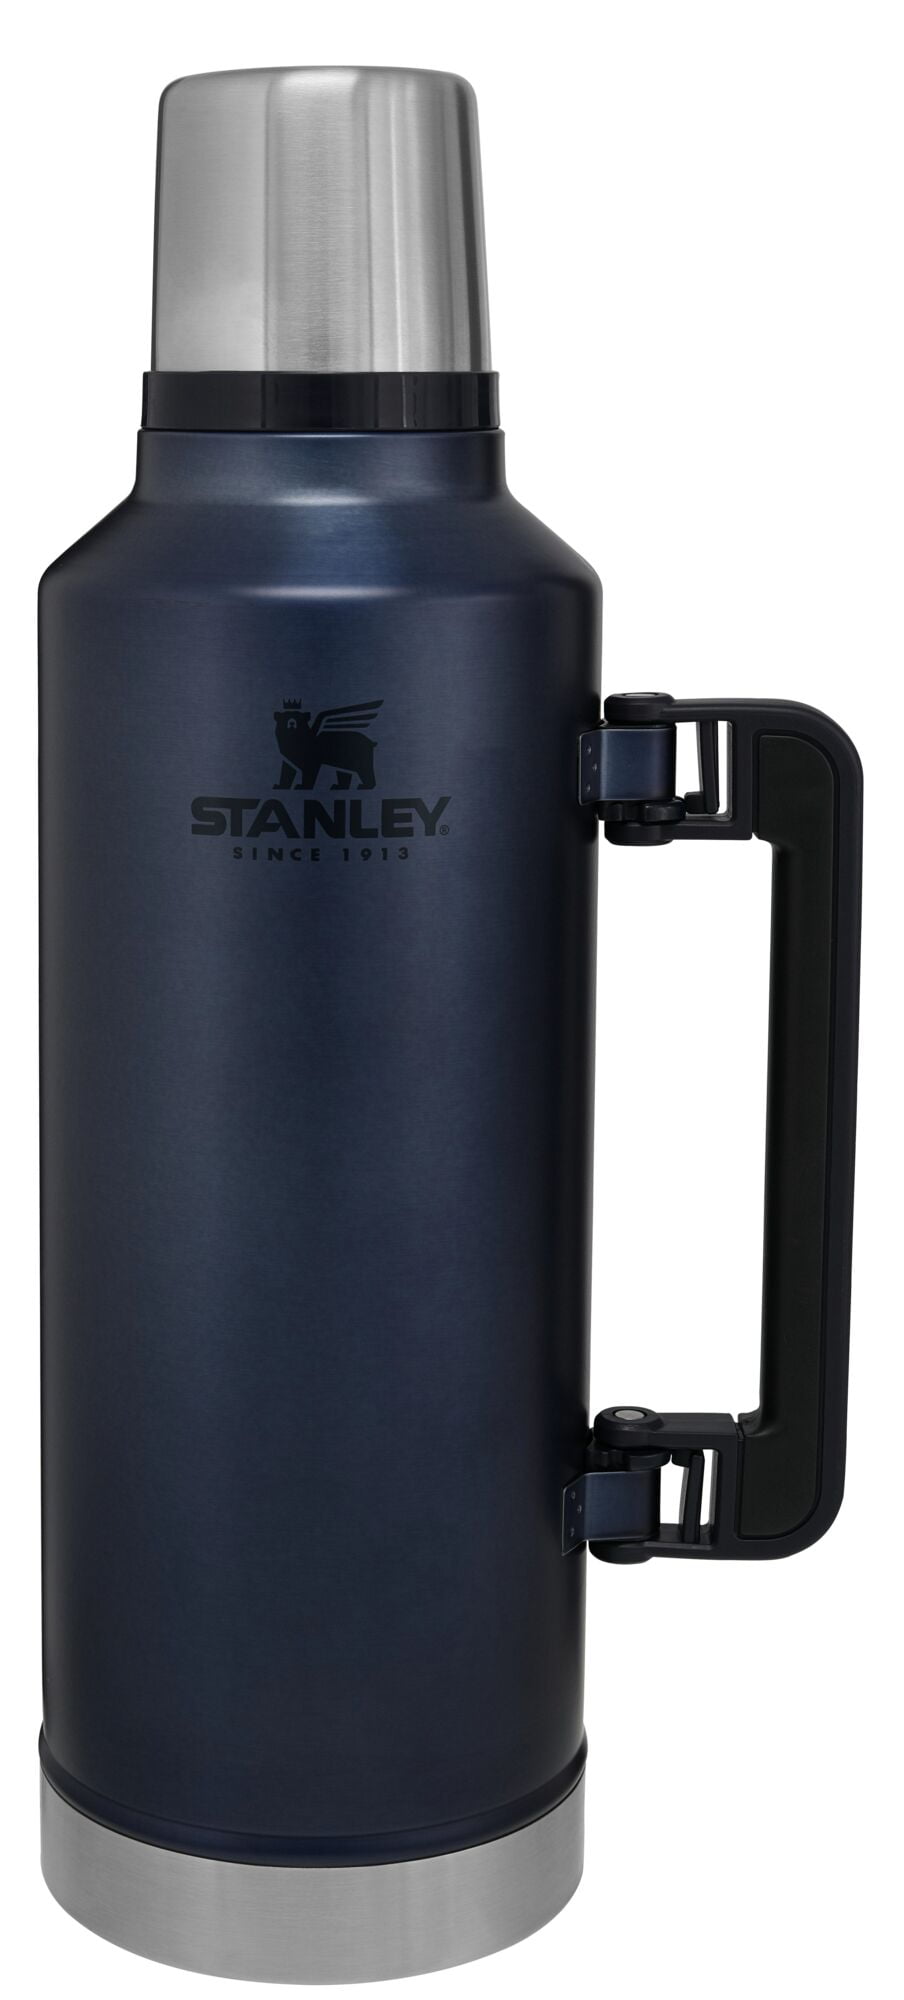 STANLEY FLASK STAINLESS STEEL DRINKS VACUUM BOTTLE LITRE THERMOS NIGHTFAL BLUE 